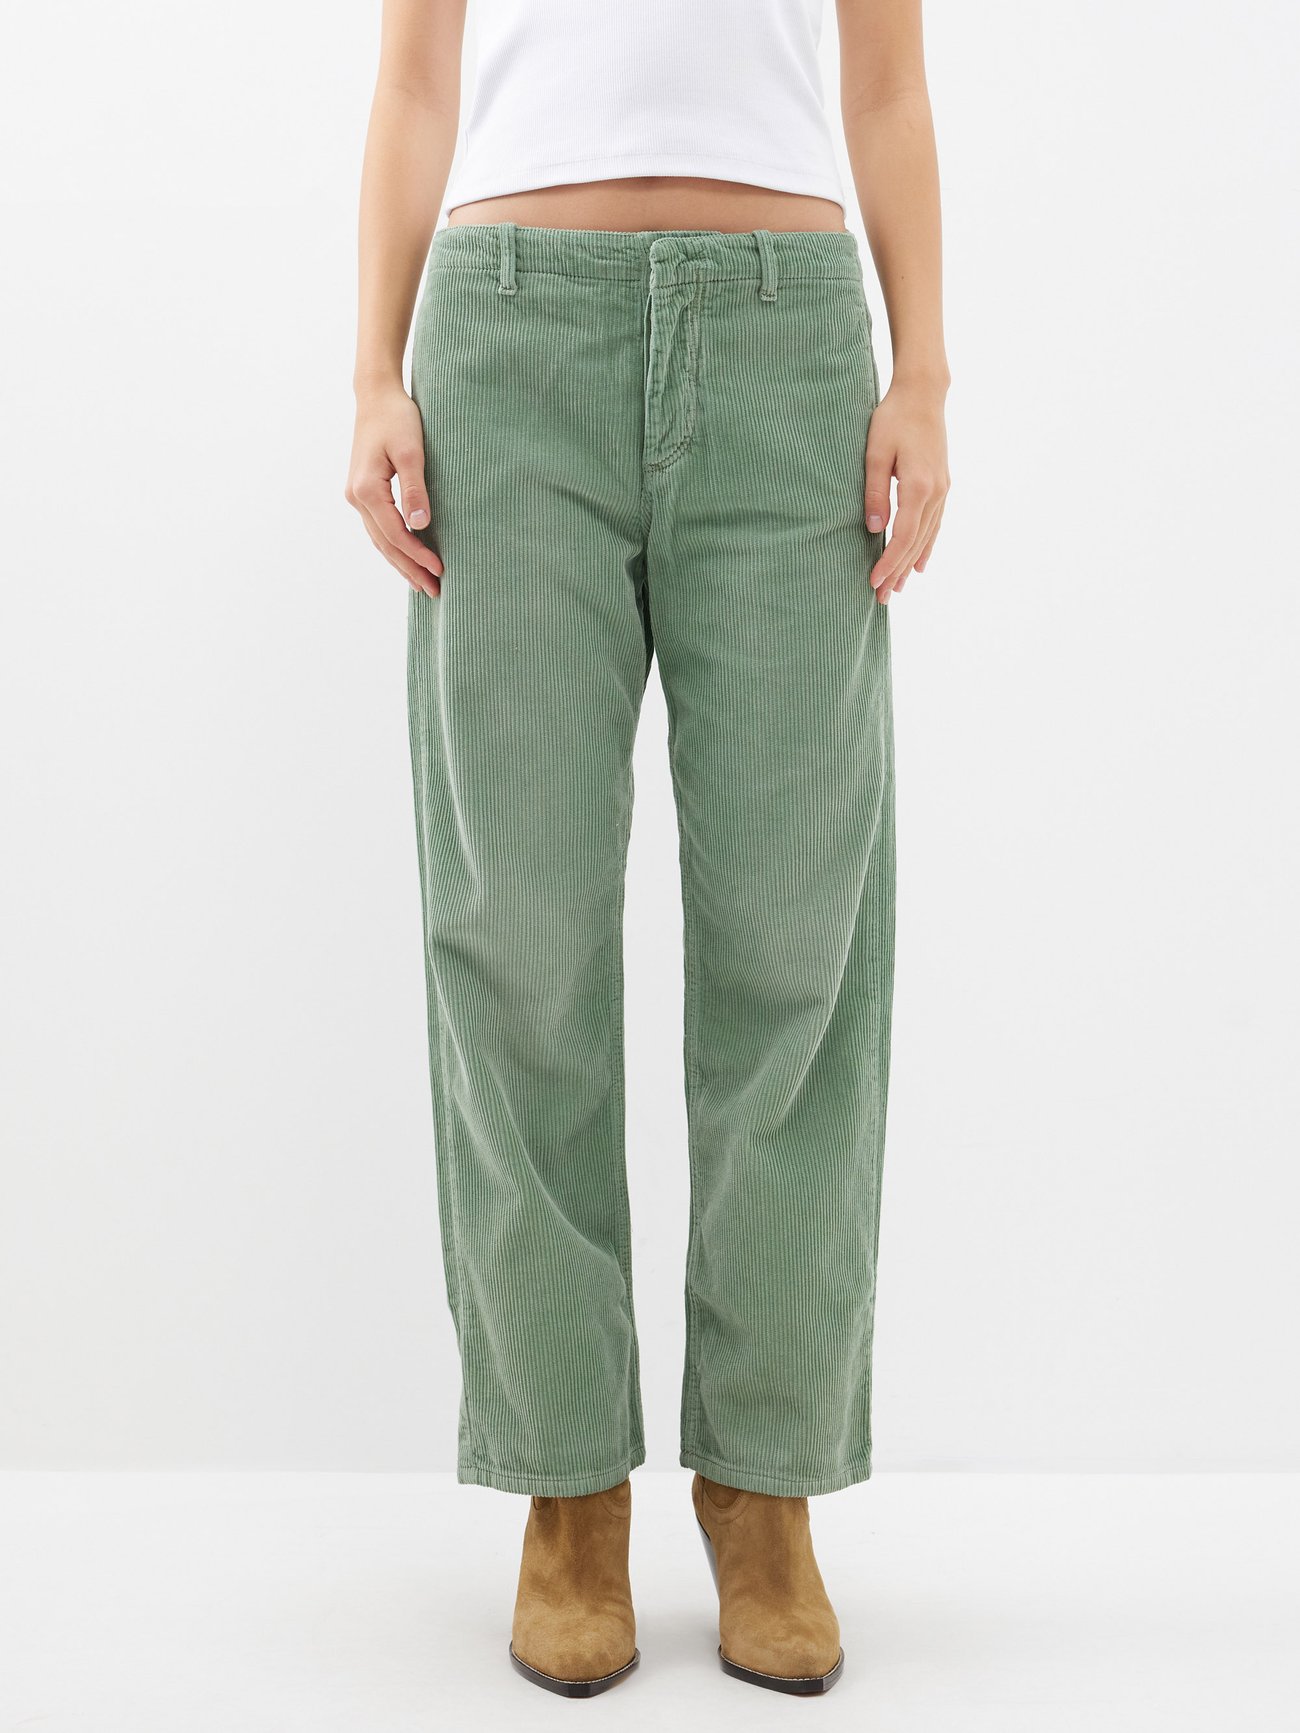 I'm Isola Marras Corduroy Trousers Woman Used W26 Tg 40 Green Lux T8247 -   Canada